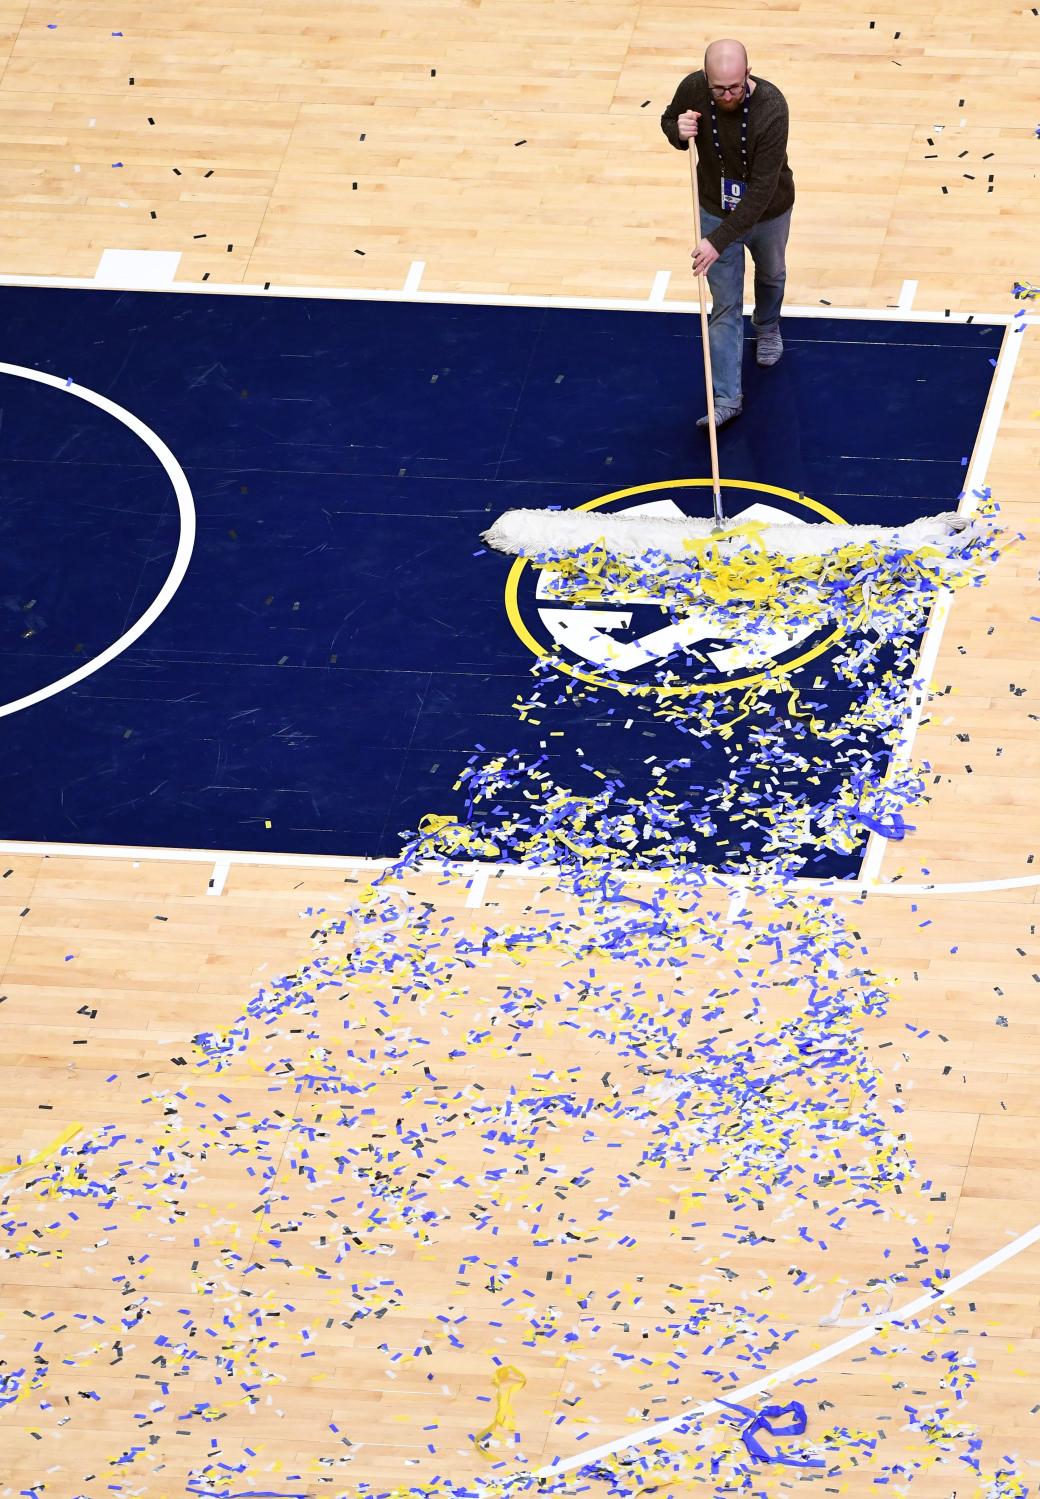 Mar 17, 2019; Nashville, TN, USA; A member of the Bridgestone Arena crew sweeps confetti off the court after a win by the Auburn Tigers over the Tennessee Volunteers in the SEC conference tournament championship game at Bridgestone Arena. Mandatory Credit: Christopher Hanewinckel-USA TODAY Sports - 12368716